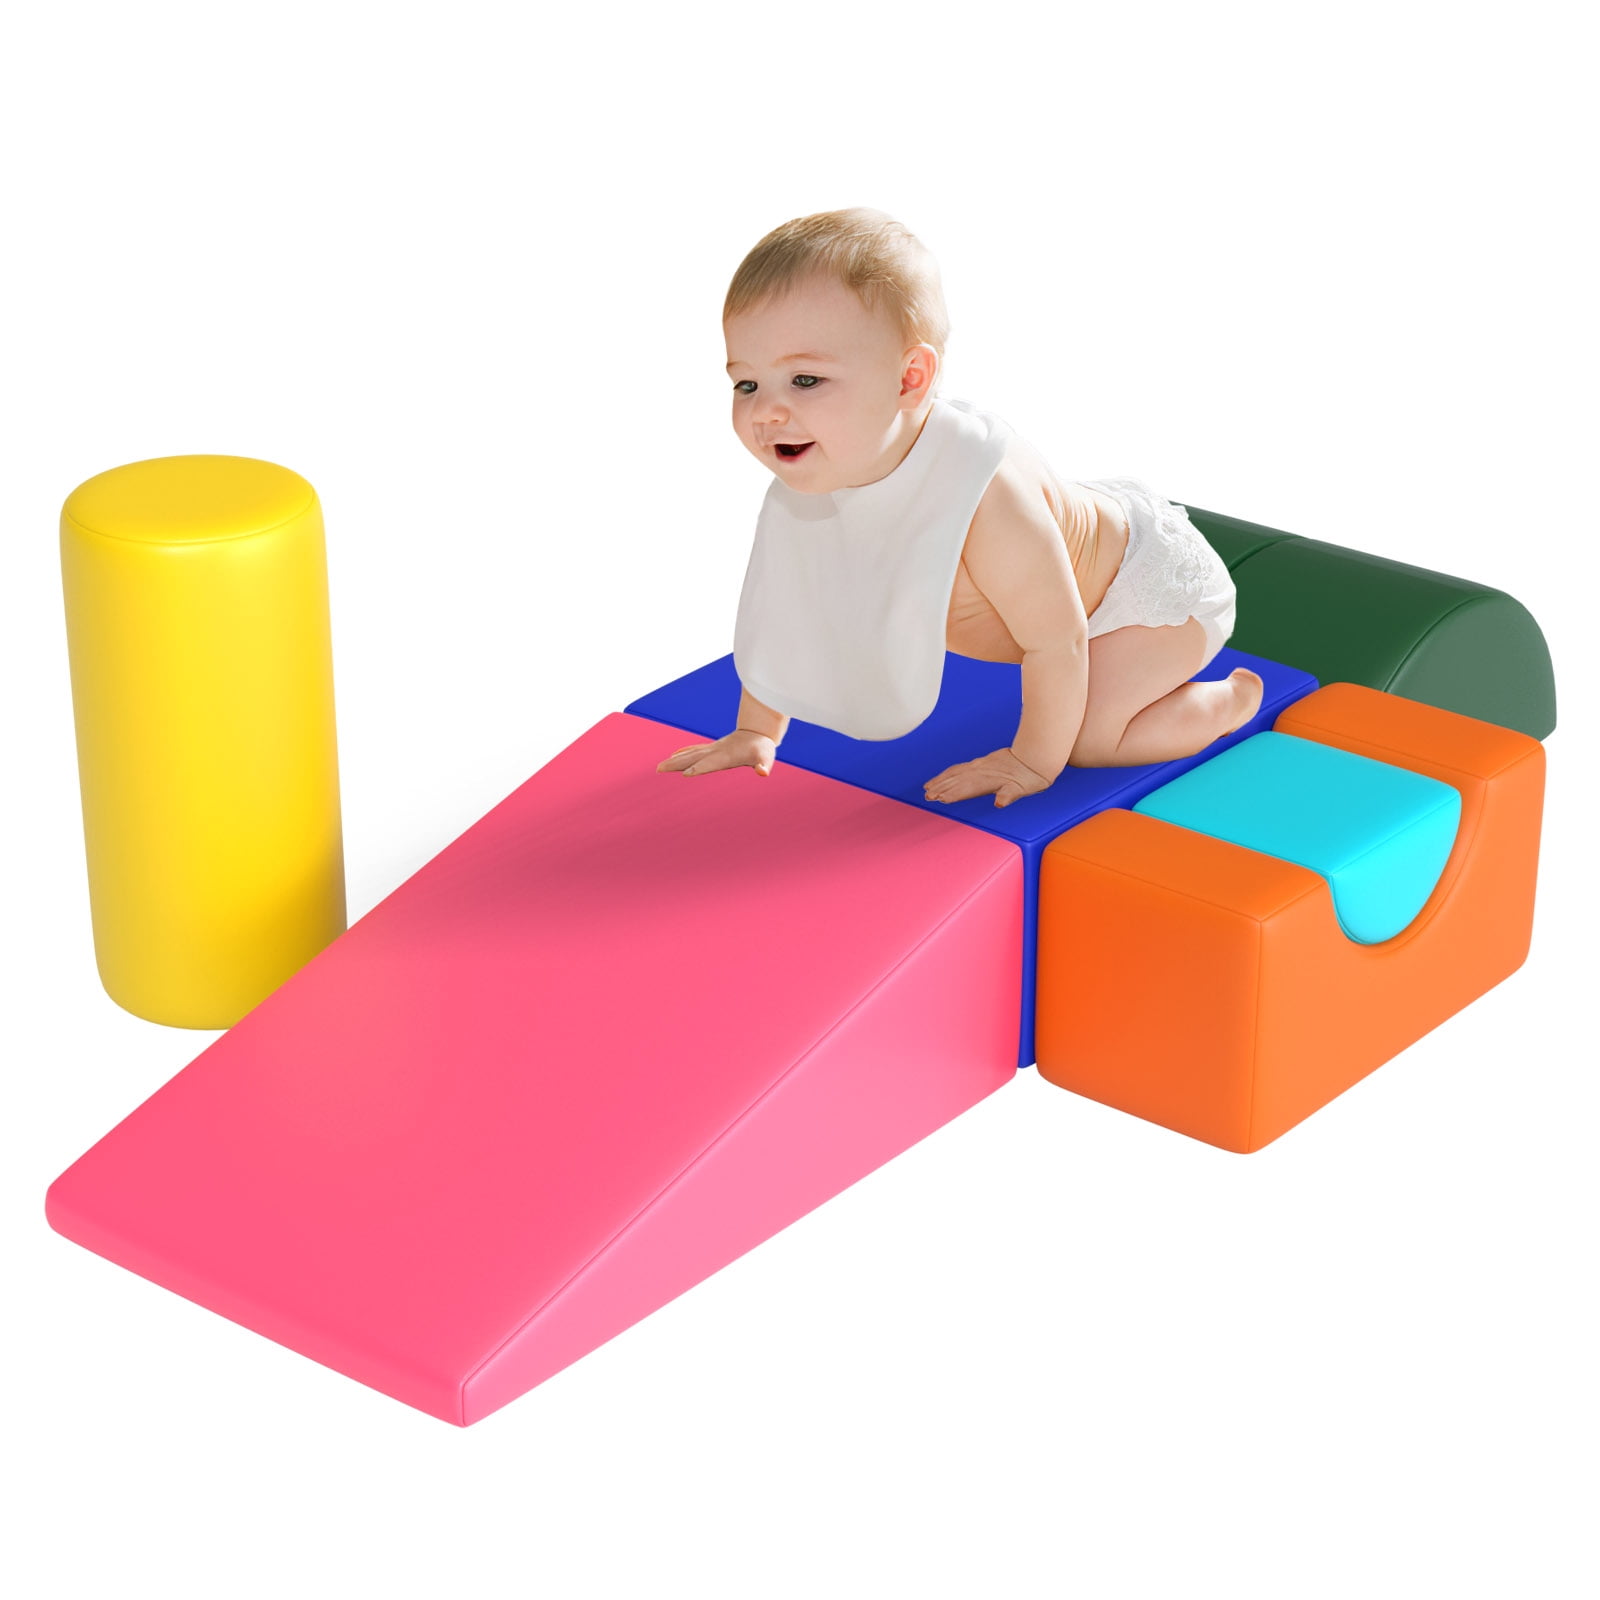 Soft Play Forms, Soft Play Equipment, Climbing and Crawling, Children's  Playground, 9 Piece Sponge Group 